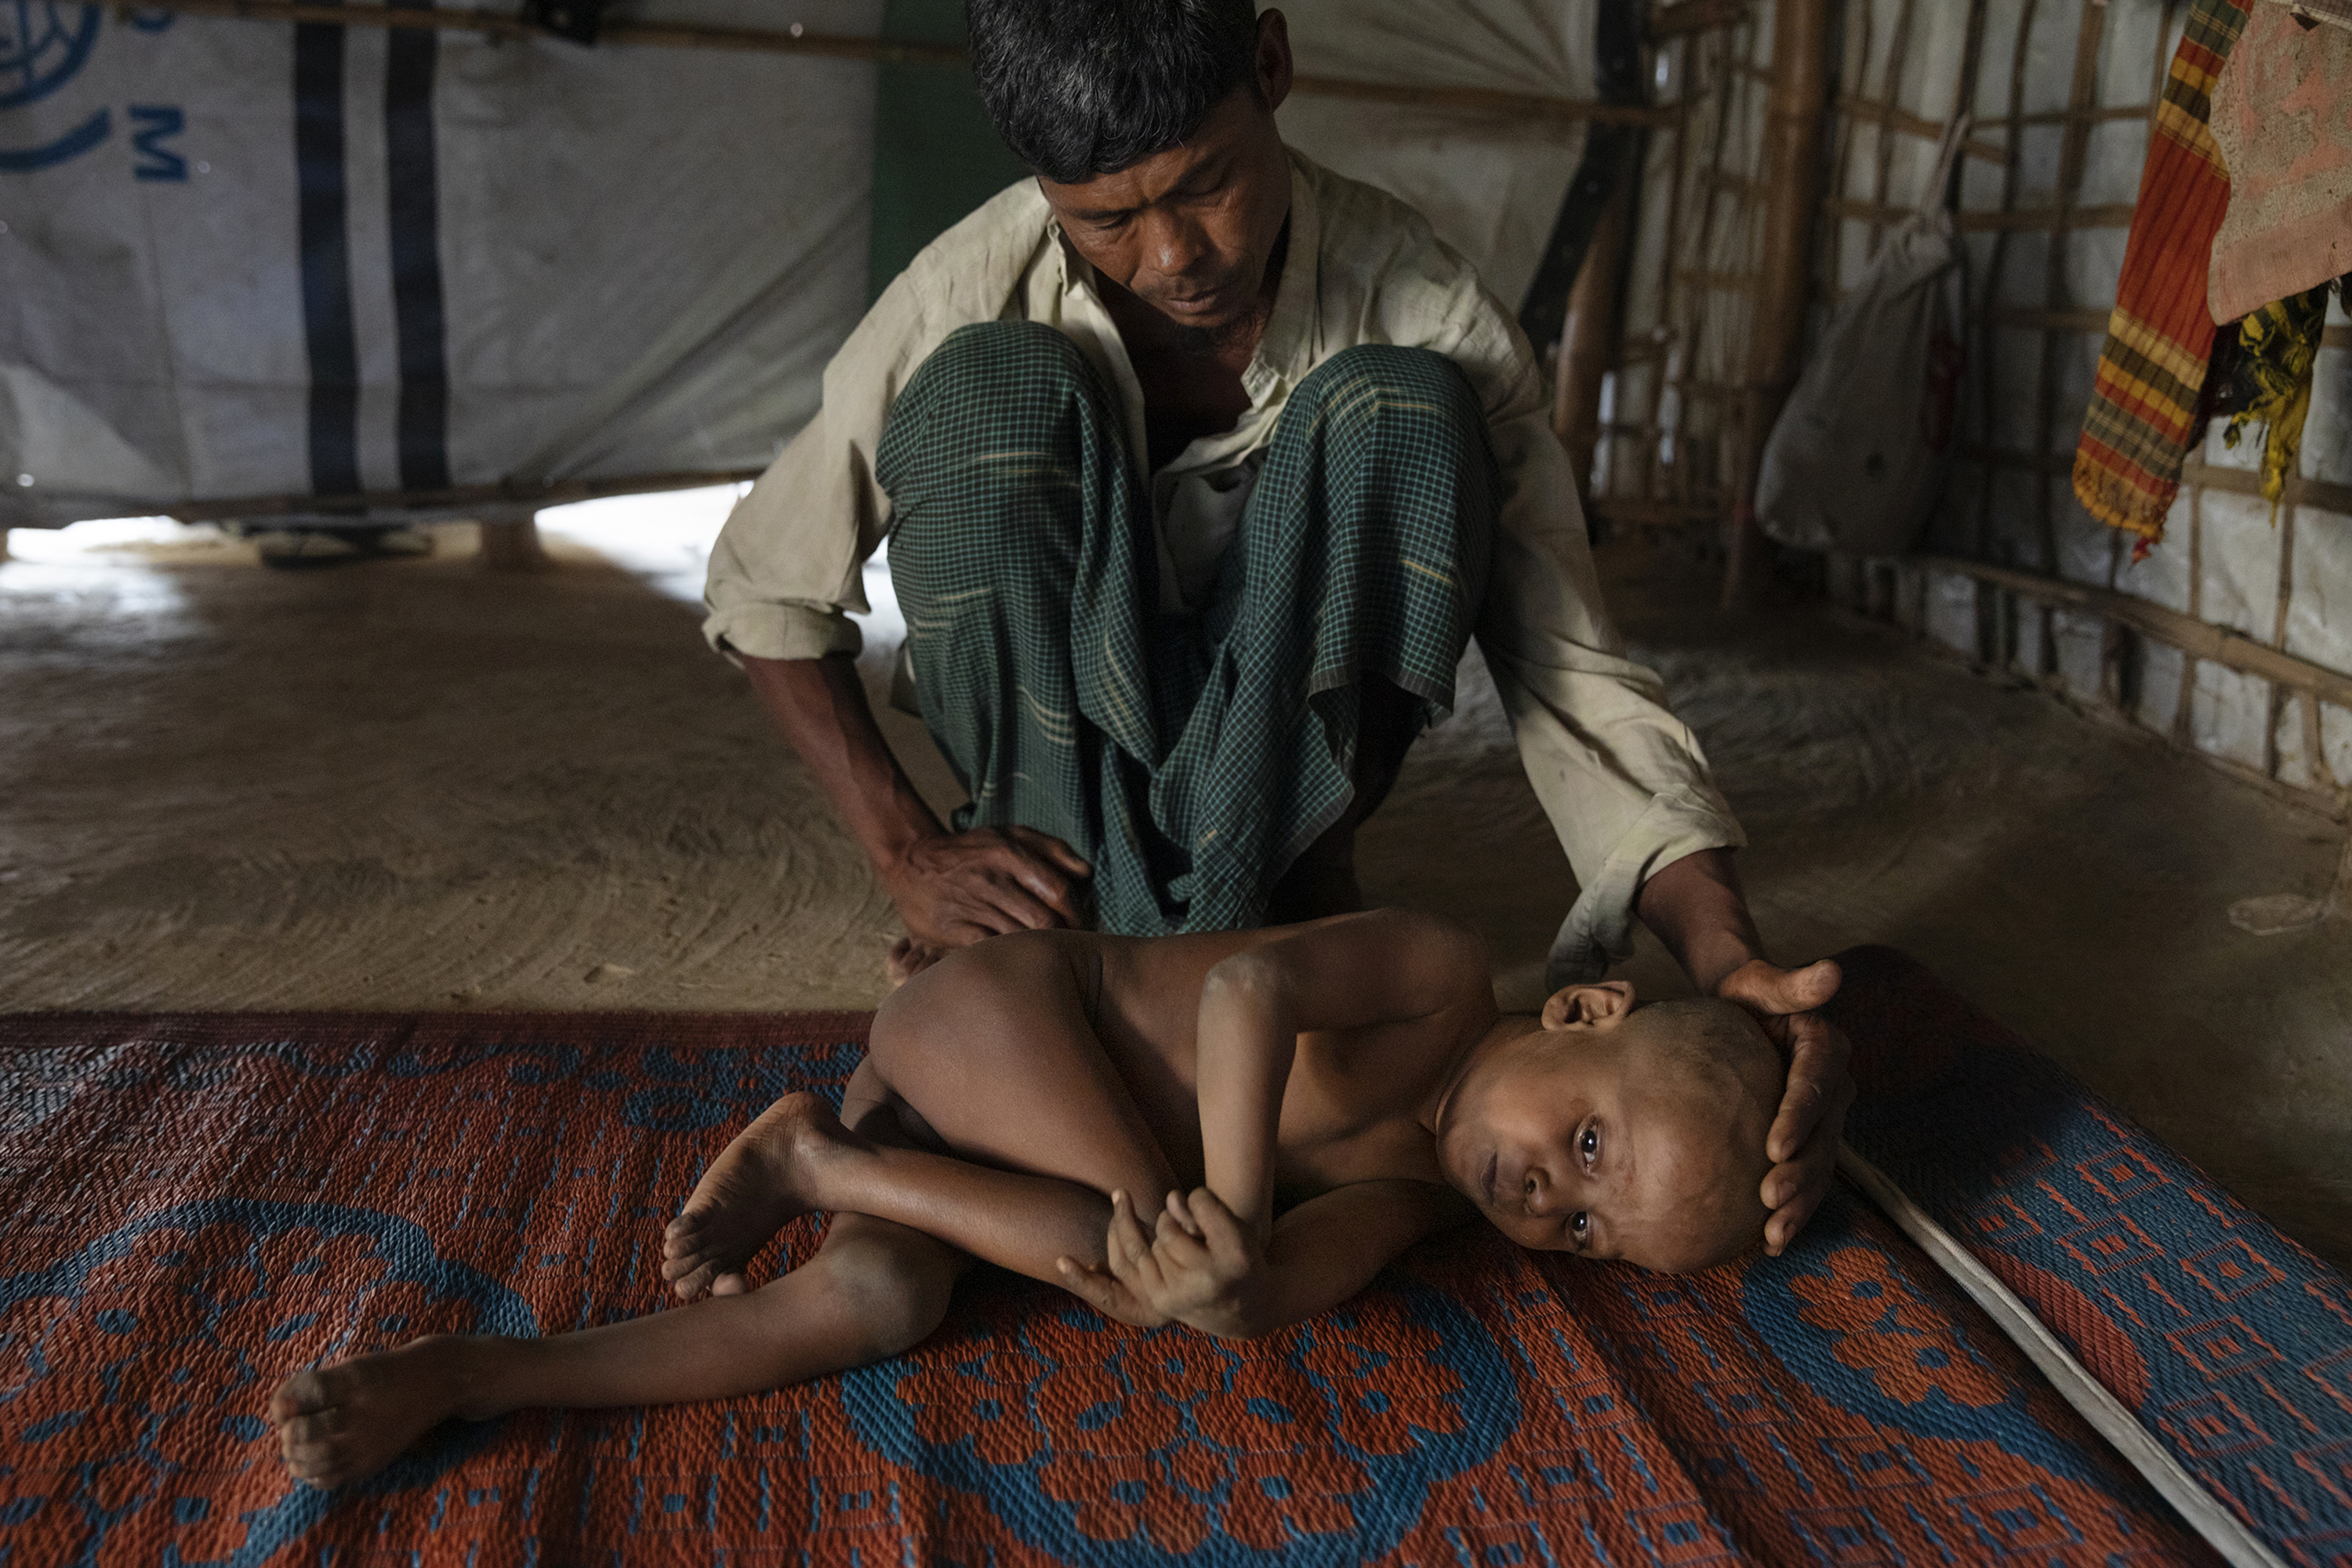 Mohammed Amin cares for his sick son, 7-year-old Mujibur Rahman, in a hut. The boy suffers from a nervous system disorder, his father said. (James Nachtwey for TIME)